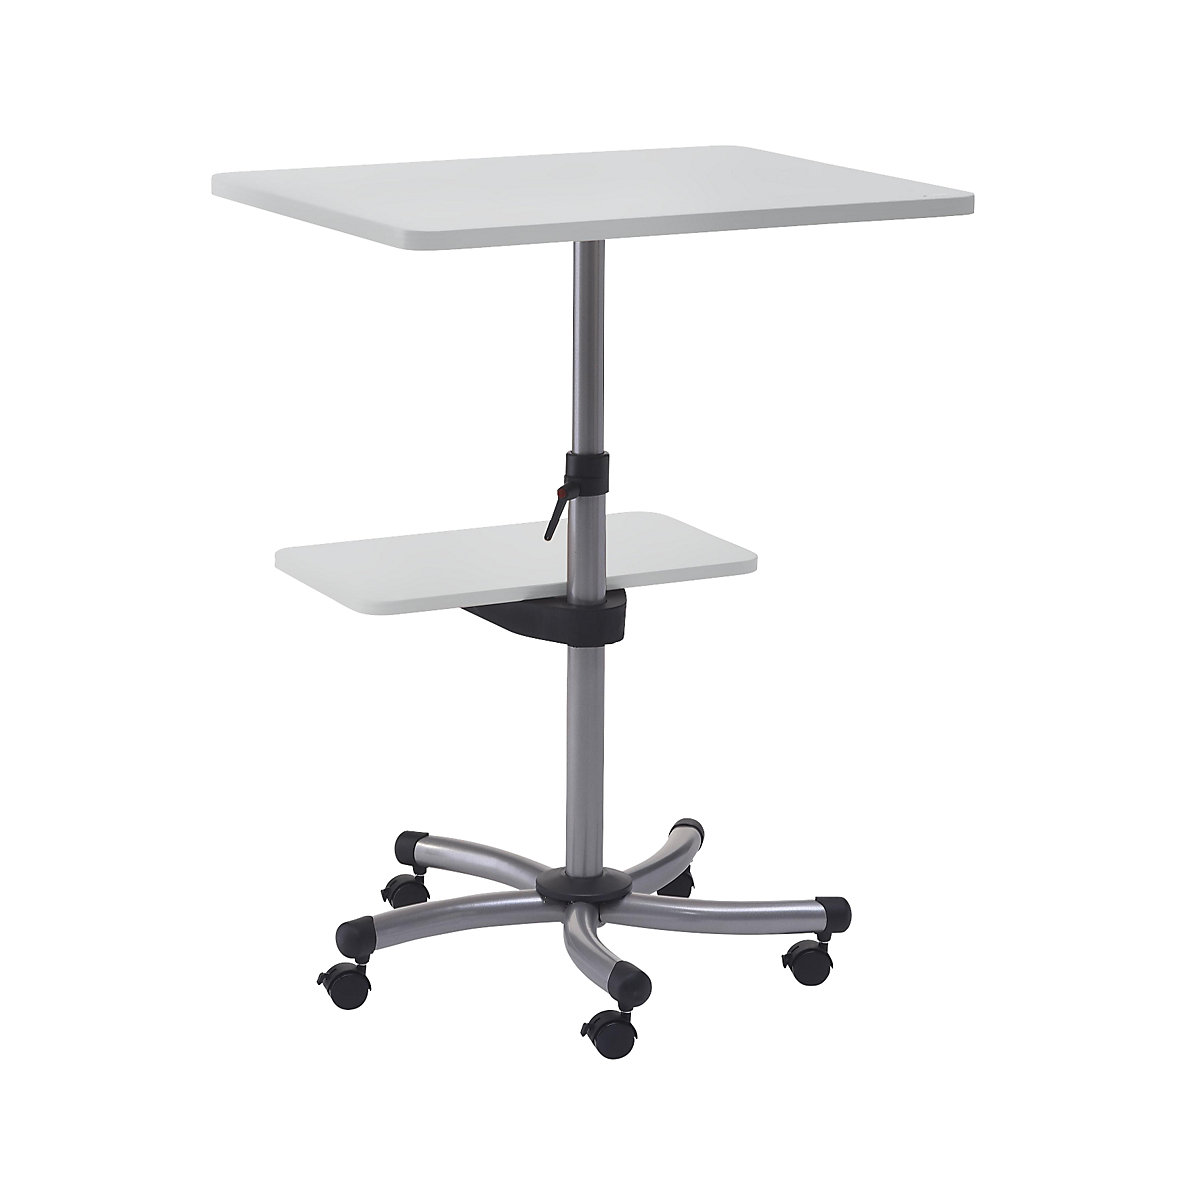 Multi-purpose table, overall height 720 – 1120 mm, light grey top-5